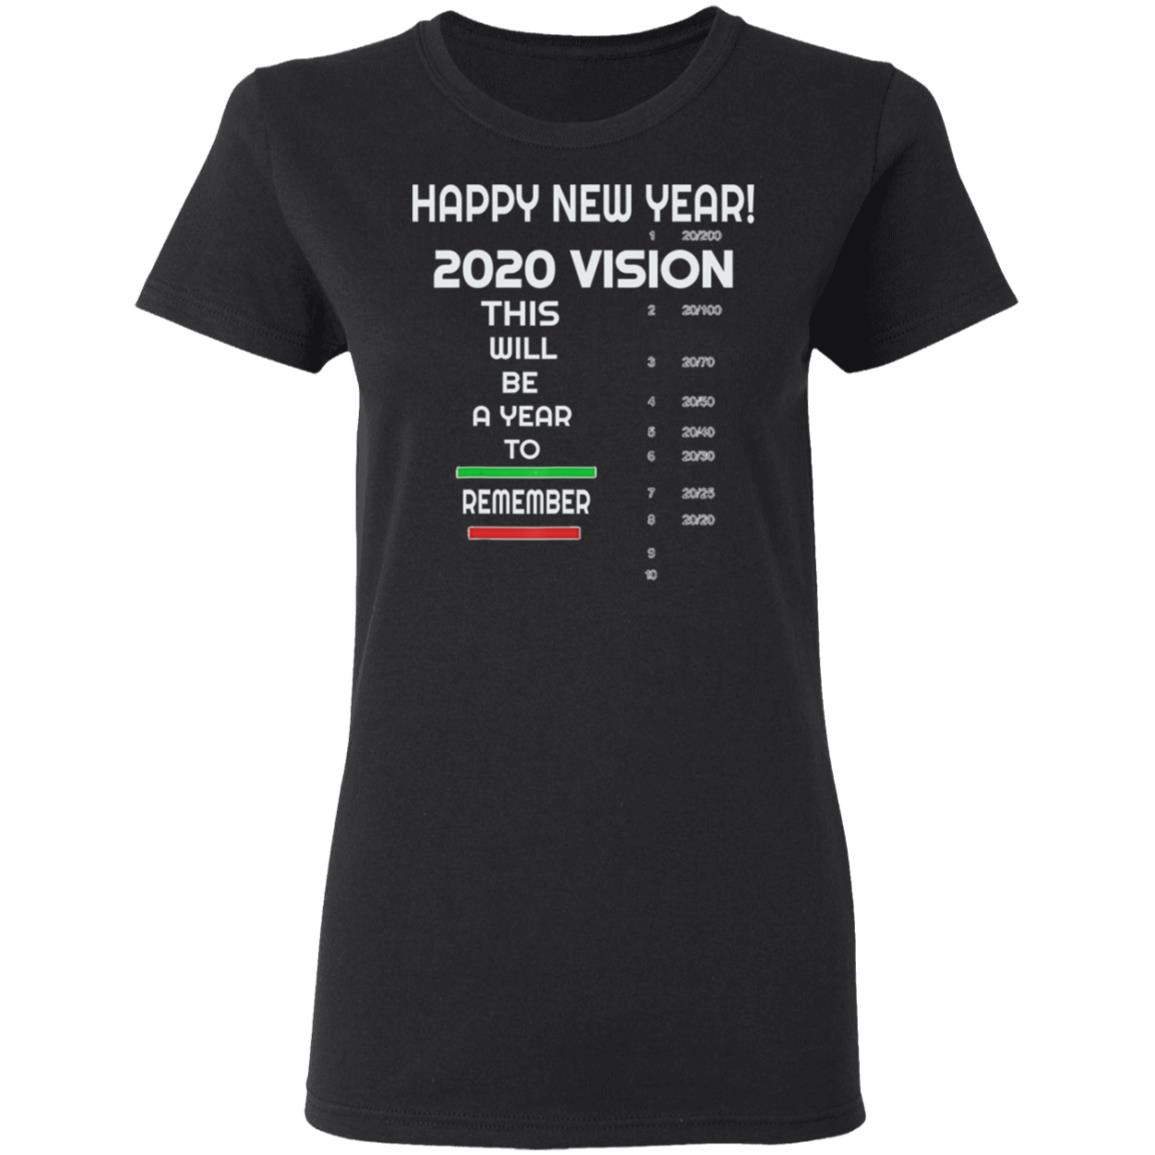 We're up next Alien T-Shirt New Years Eve Funny New Years Funny Alien Funny New Years Eve Funny 2021